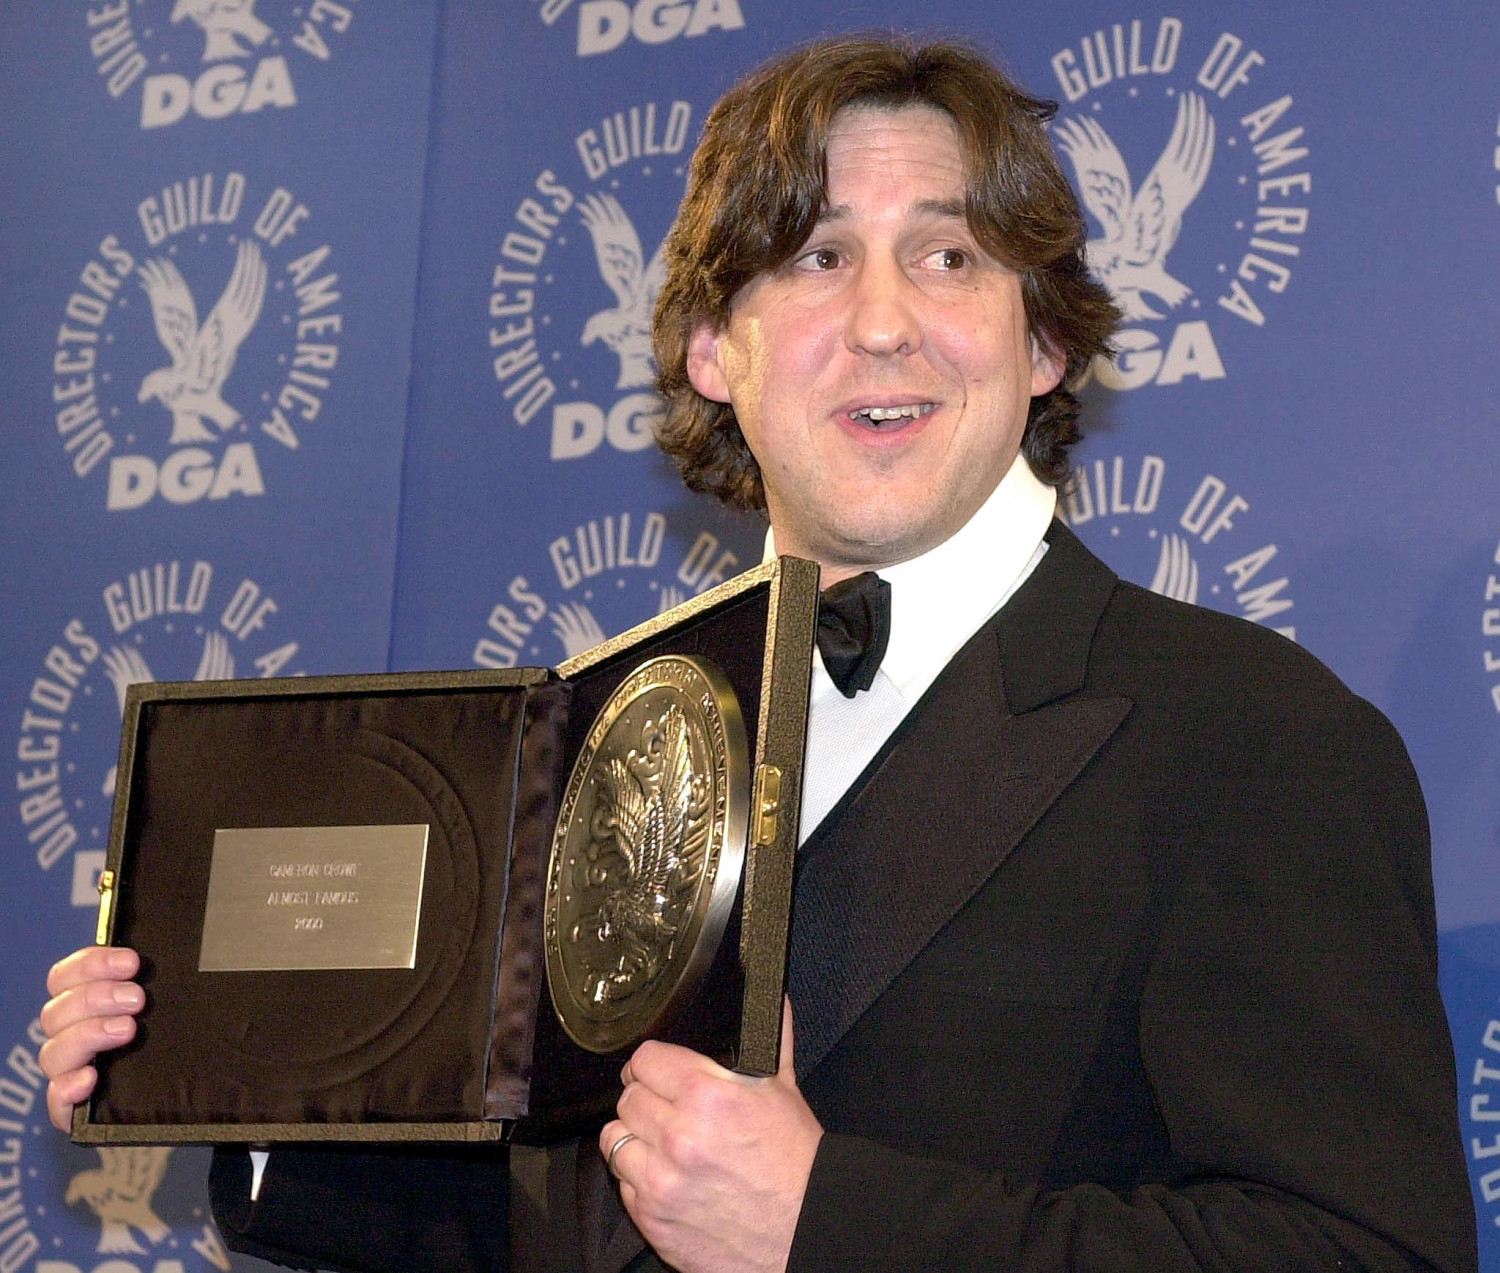 Cameron Crowe was recognized for his directorial achievement